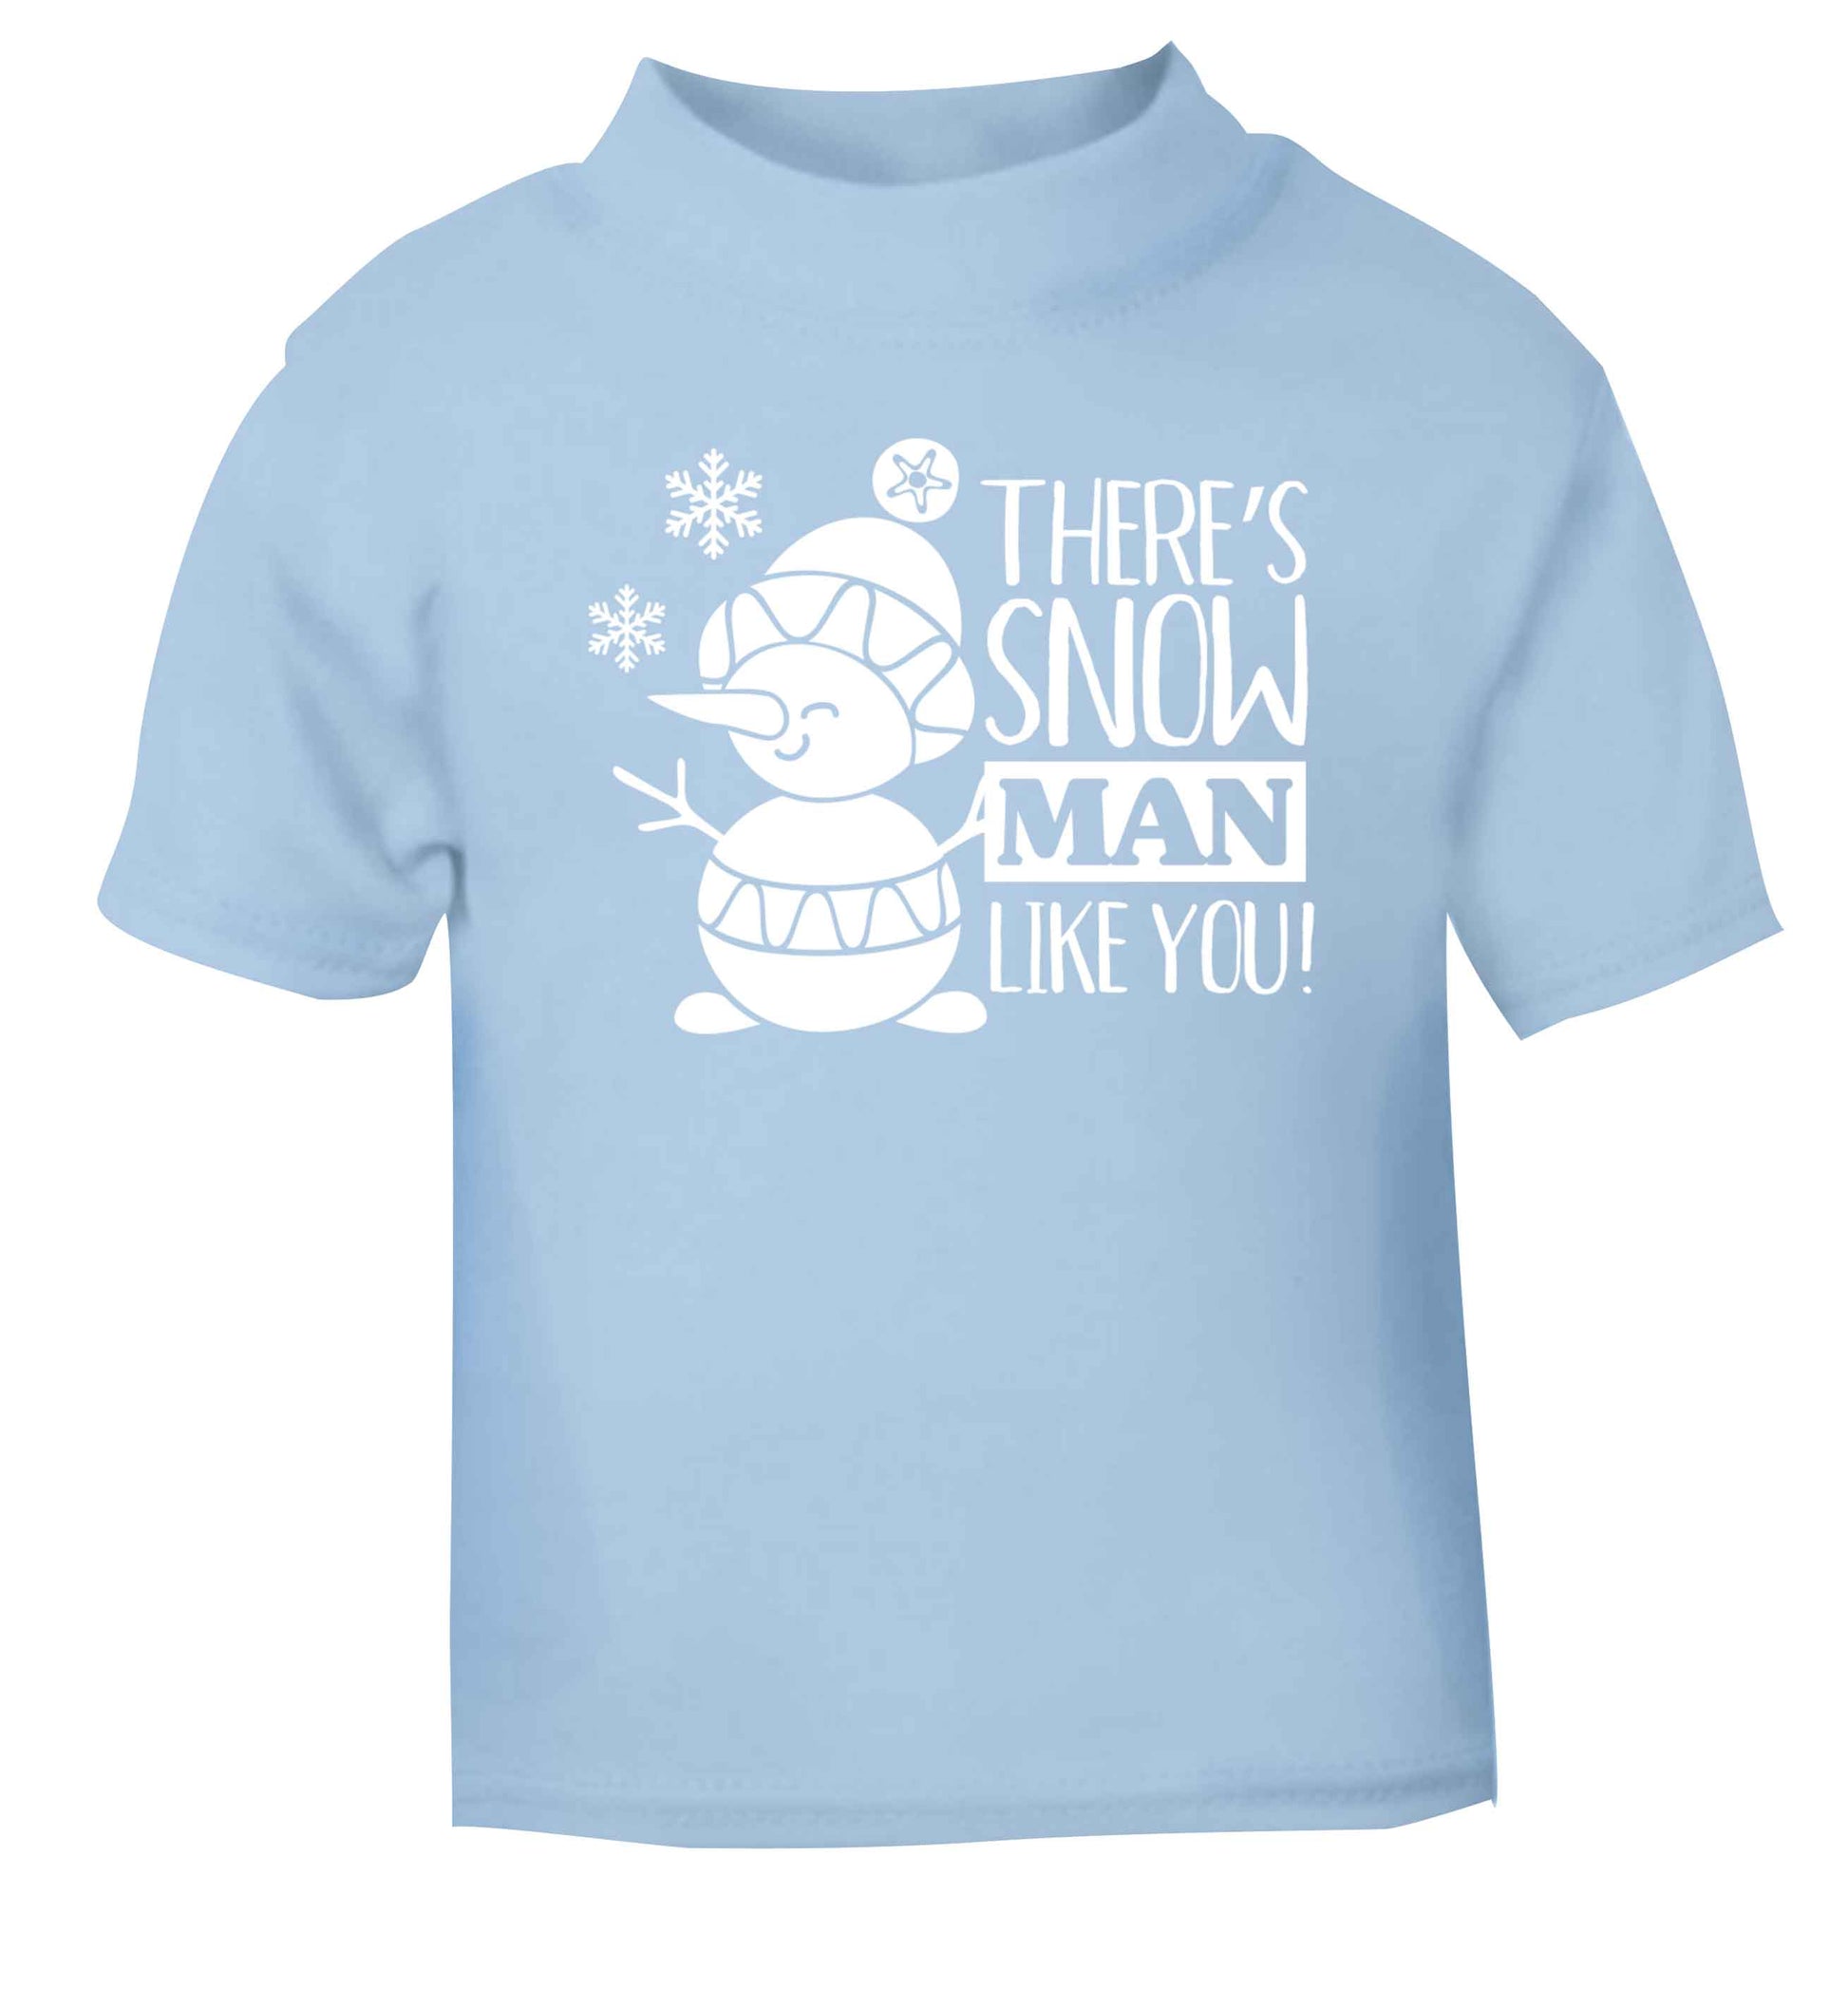 There's snow man like you light blue baby toddler Tshirt 2 Years